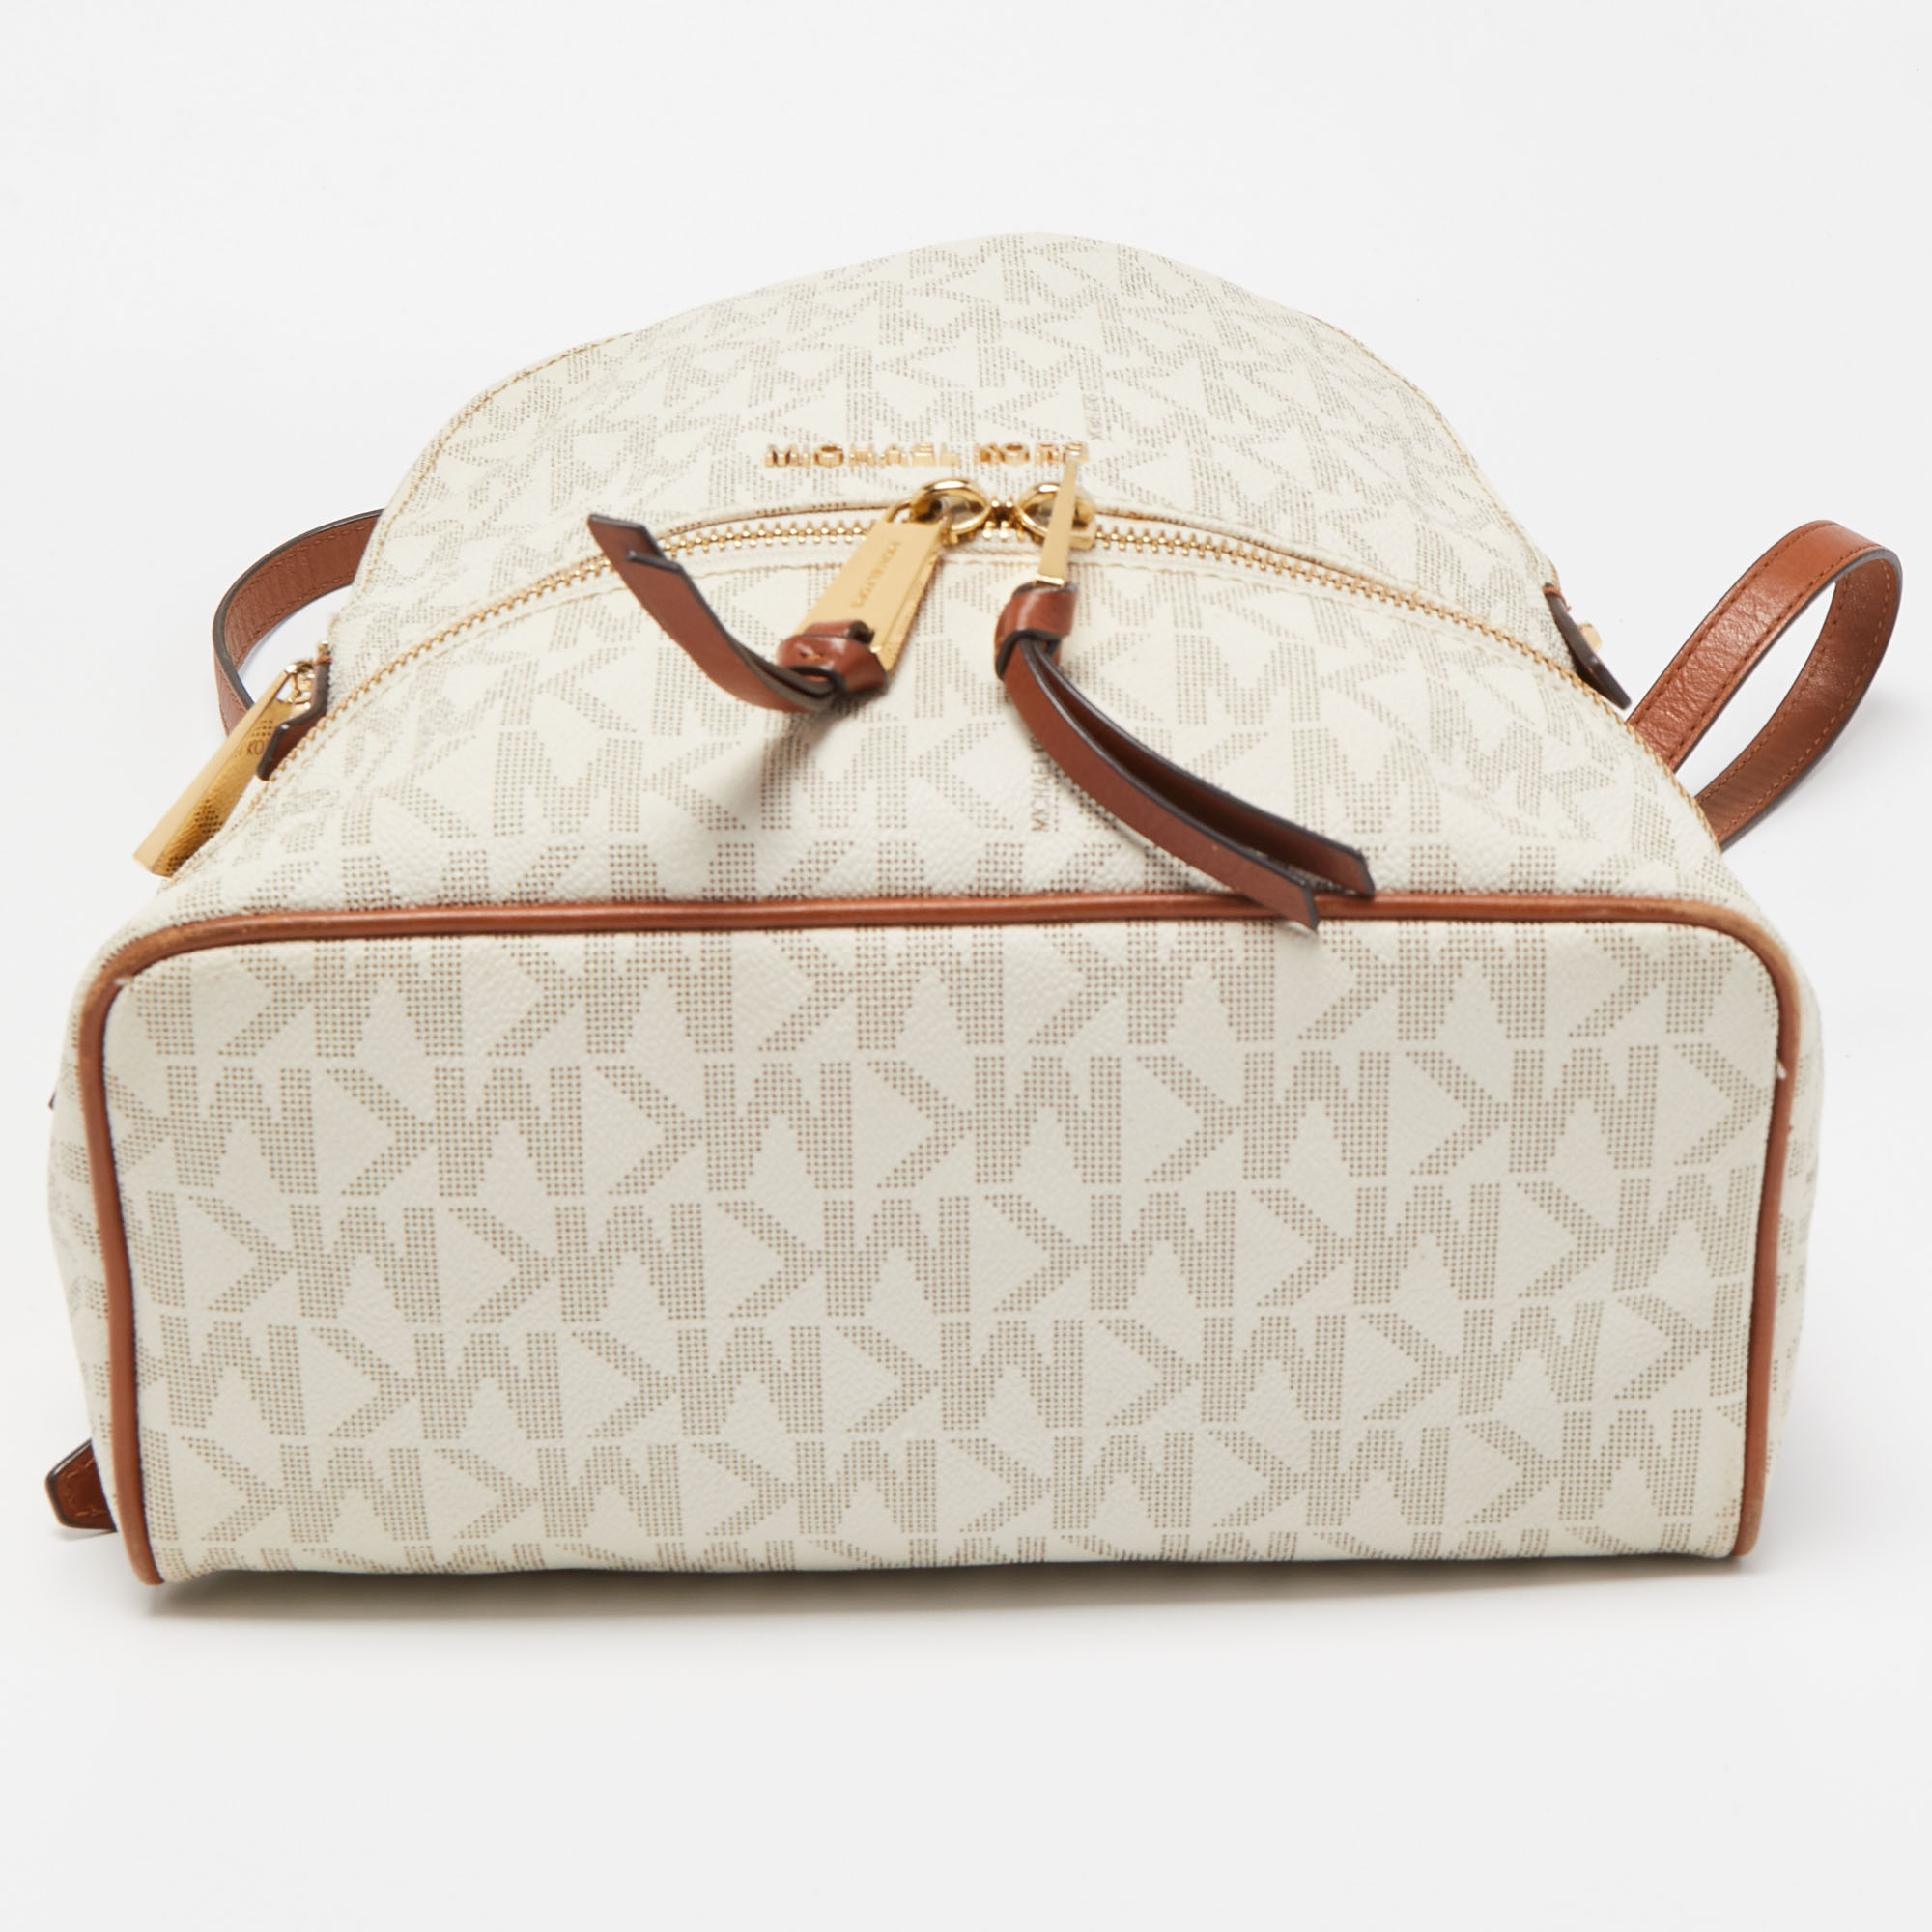 Michael Kors White/Tan Signature Coated Canvas And Leather Rhea Backpack